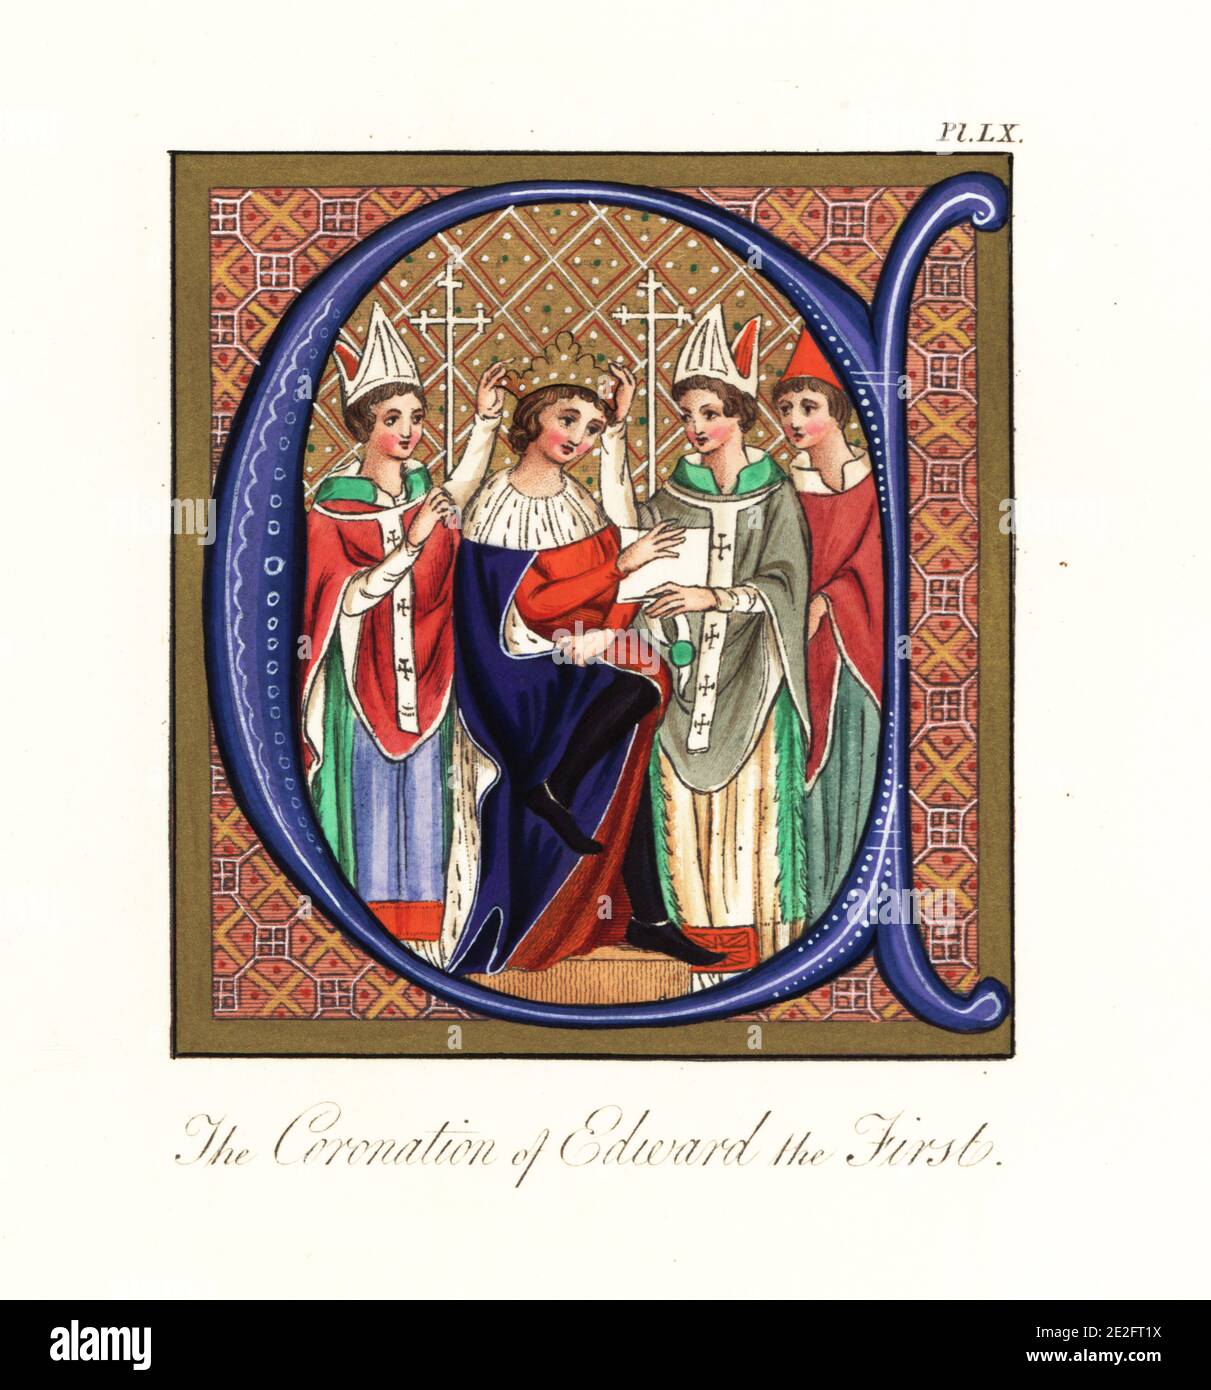 The coronation of King Edward I of England, Edward Longshanks or the Hammer of the Scots, in 1274. The king is seated on a throne while bishops place a crown on his head. From an initial in an illuminated manuscript, Statua Antiqua, Harley MS 926. Handcoloured engraving by Joseph Strutt from his Complete View of the Dress and Habits of the People of England, Henry Bohn, London, 1842. Stock Photo